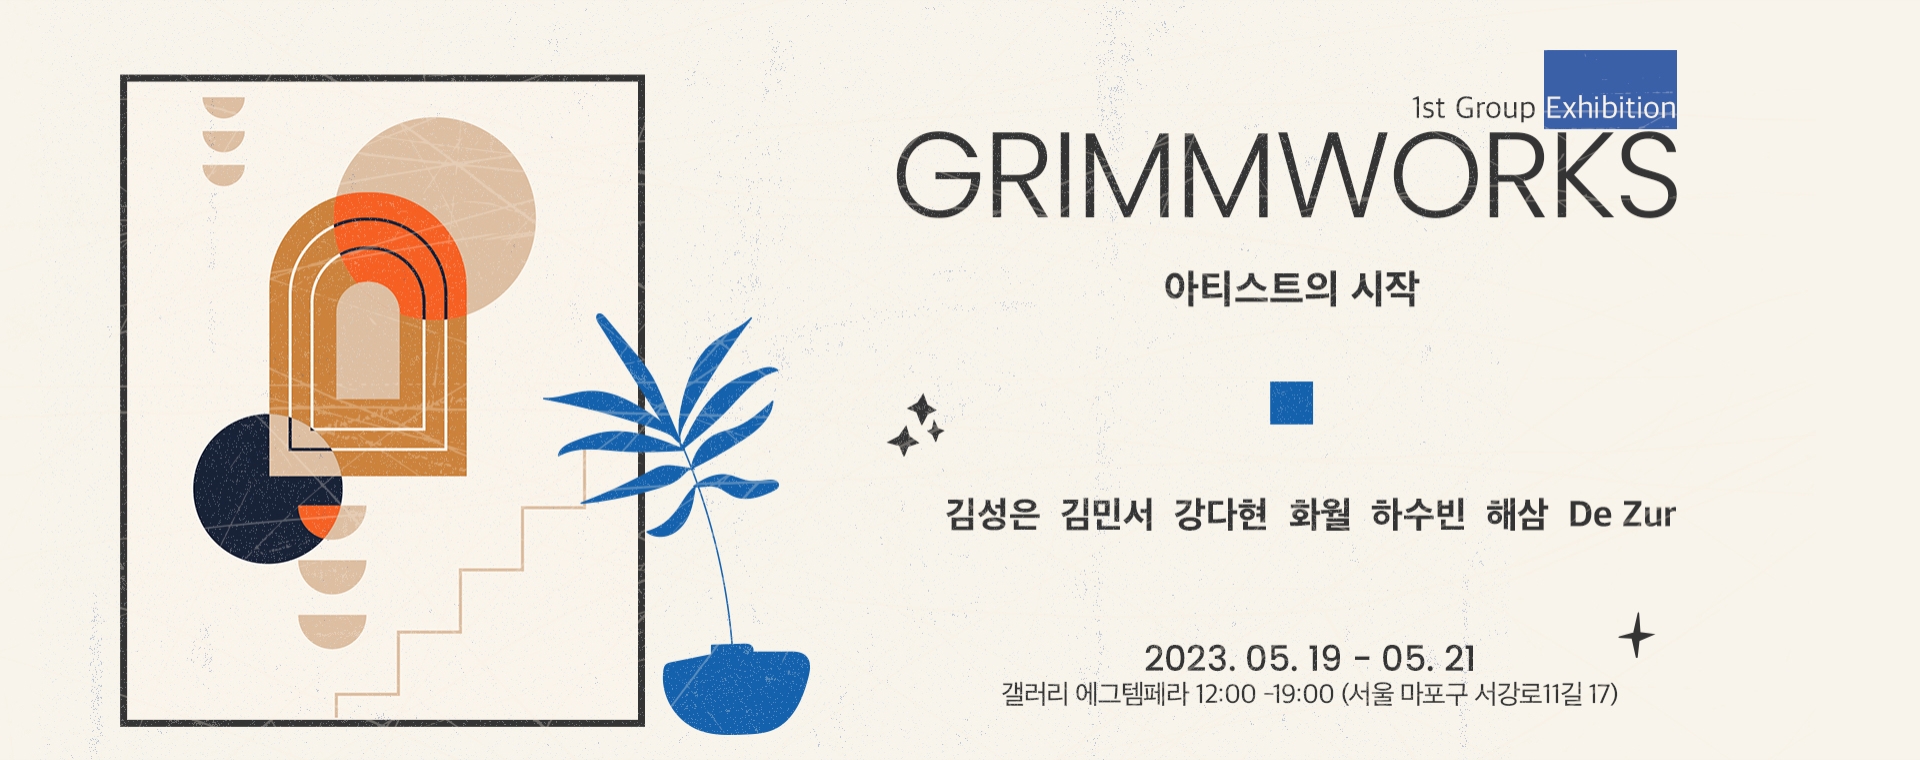 GRIMM WORKS 1st Group Exhibition